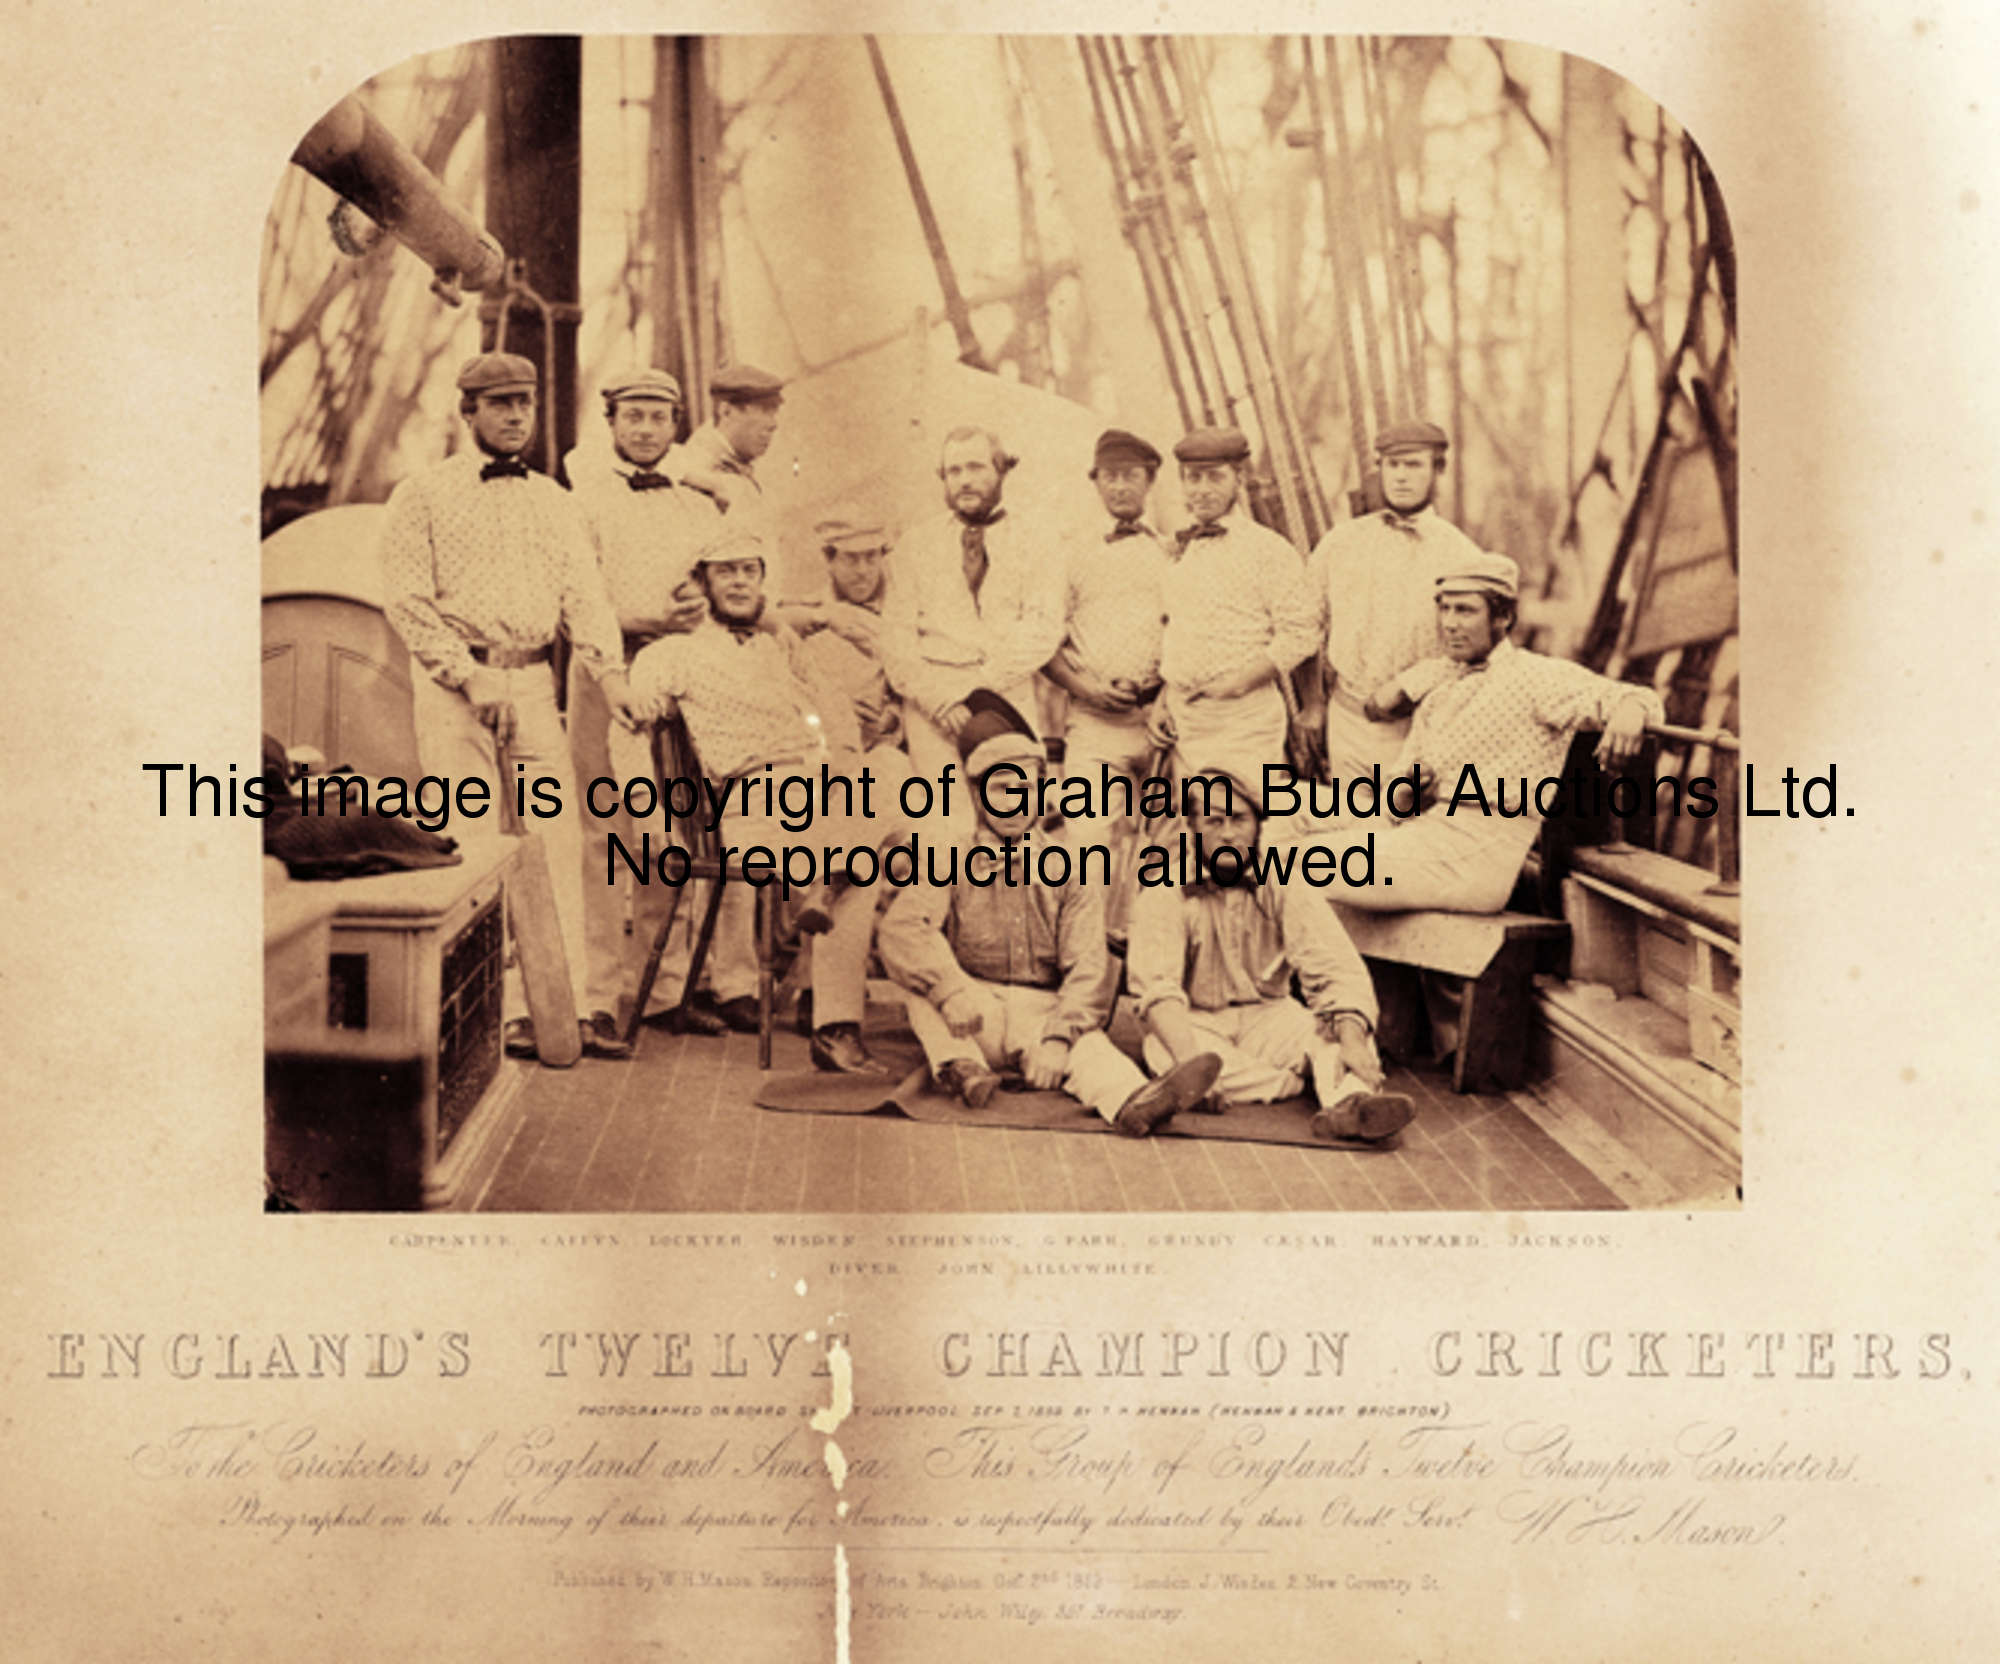 England's Twelve Champion Cricketers, 1859, photograph by T.H. Hennah, with printed legend, taken on...